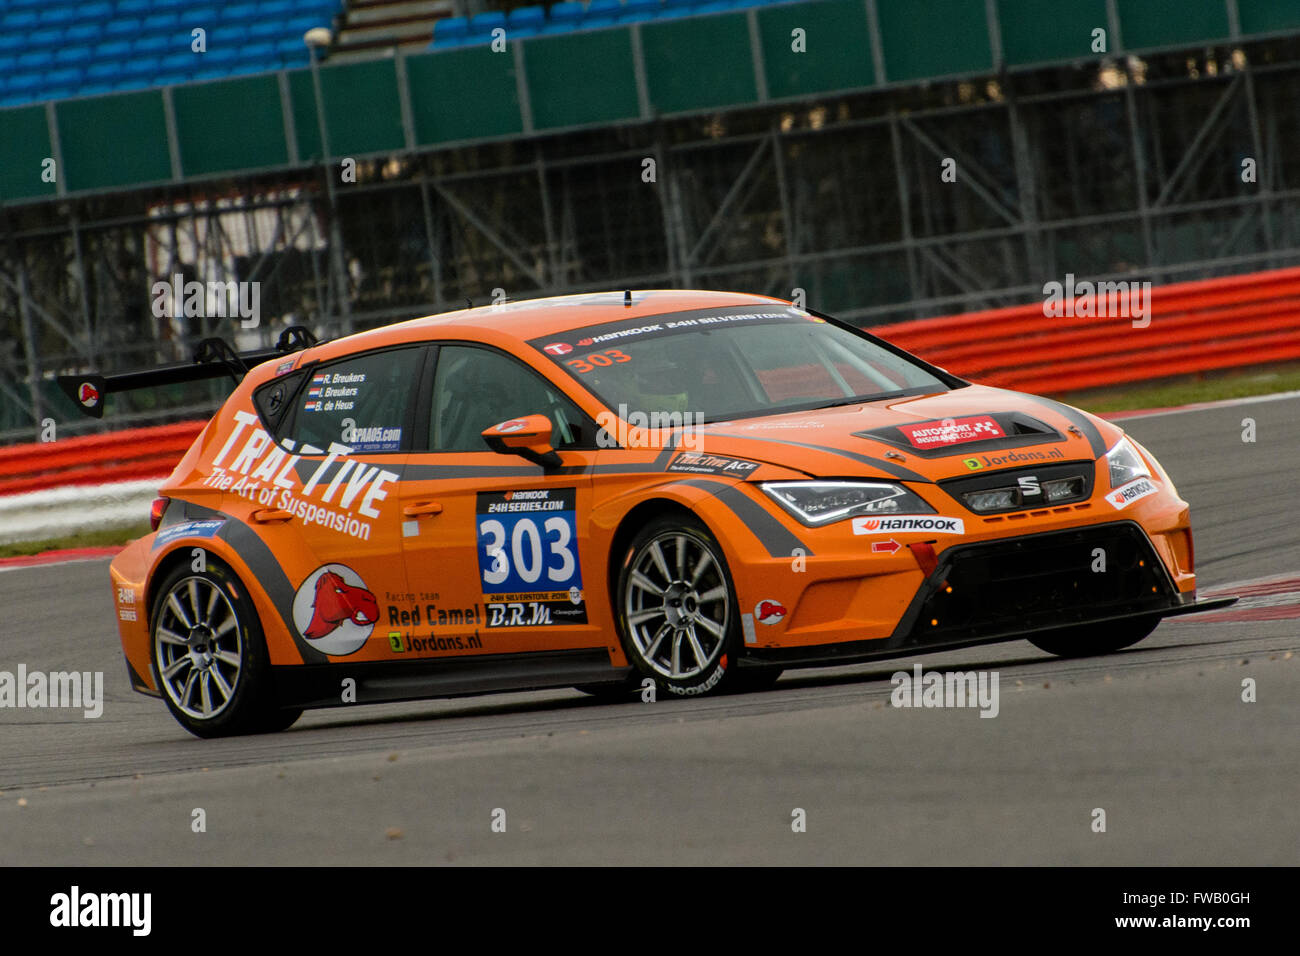 Towcester, Northamptonshire, UK. 2nd April, 2016. Red Camel-Jordans.nl Seat Leon Cup Racer during the Hankook 24 Hours Touring Car Series at Silverstone Circuit (Photo by Gergo Toth / Alamy Live News) Stock Photo